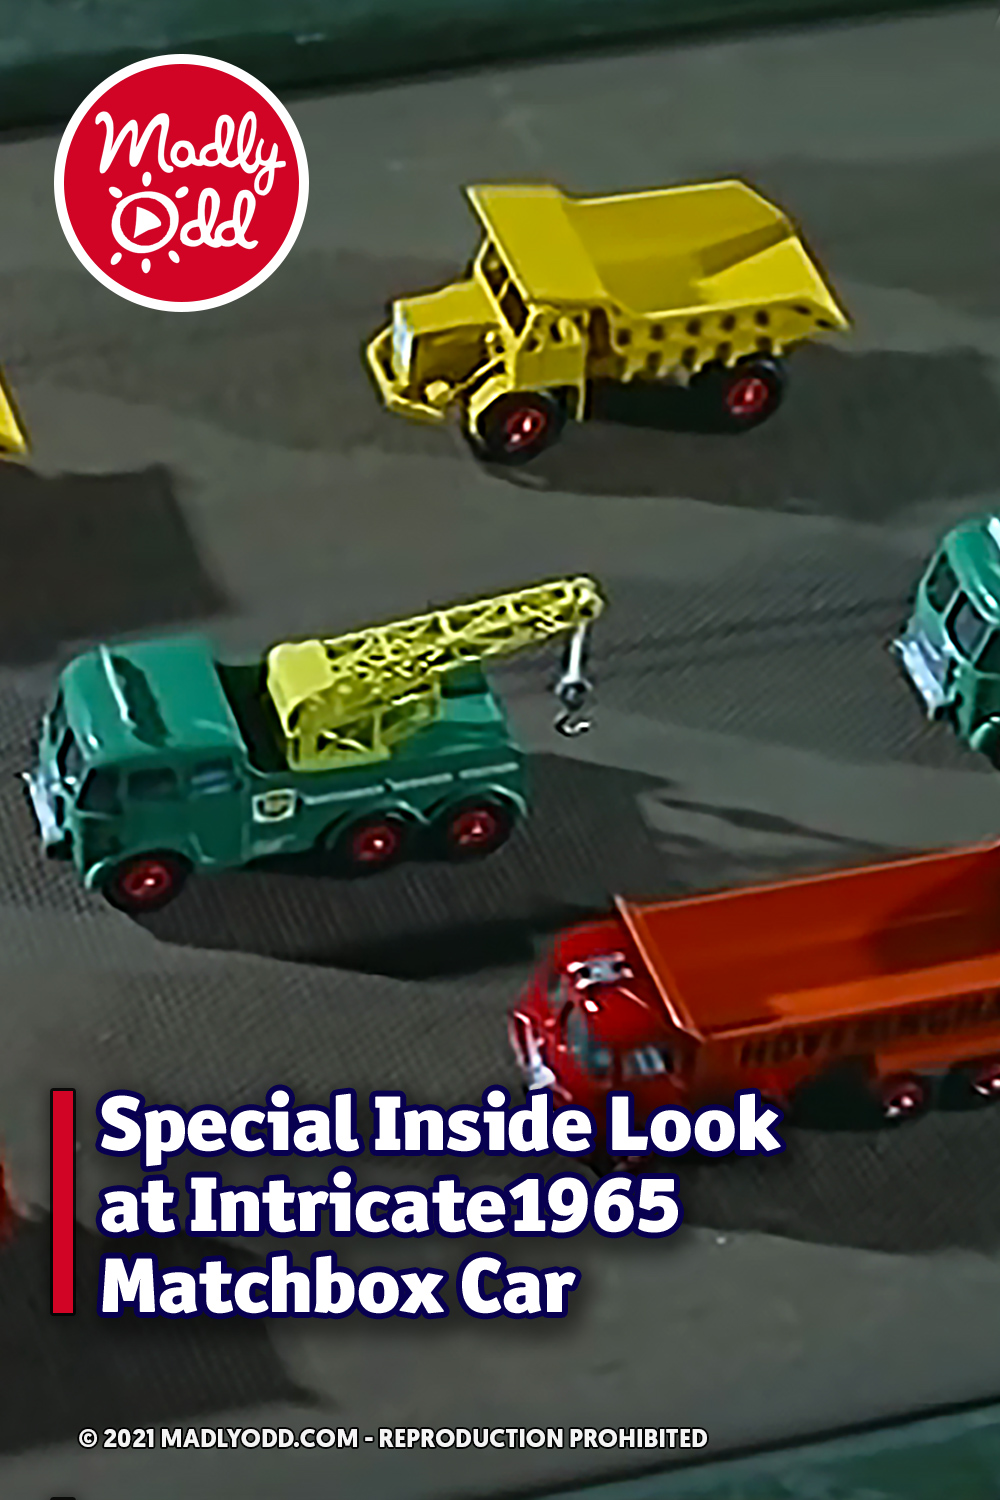 Special Inside Look at Intricate1965 Matchbox Car